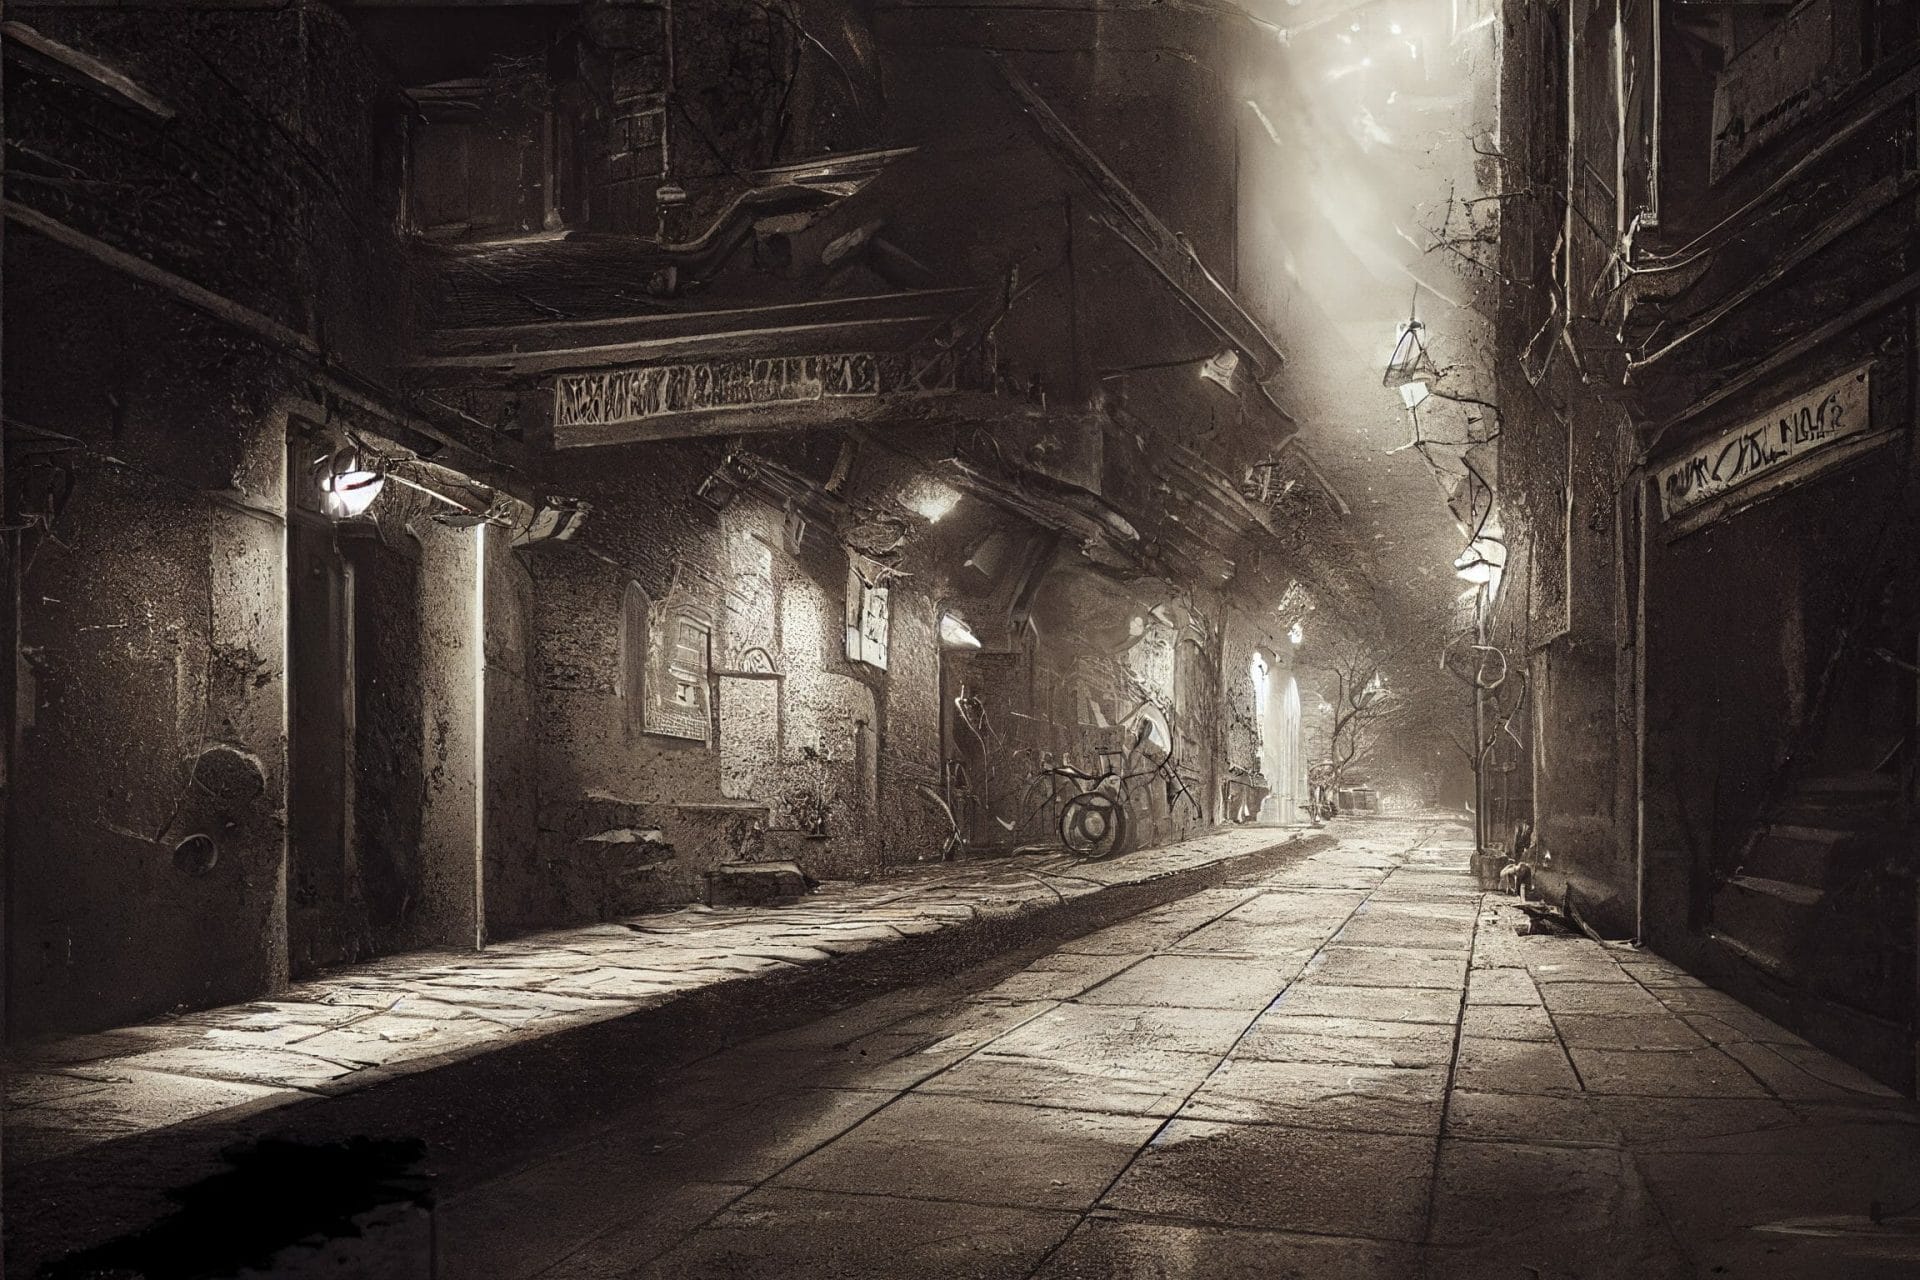 Black and white alley with paving stones and old style street lights